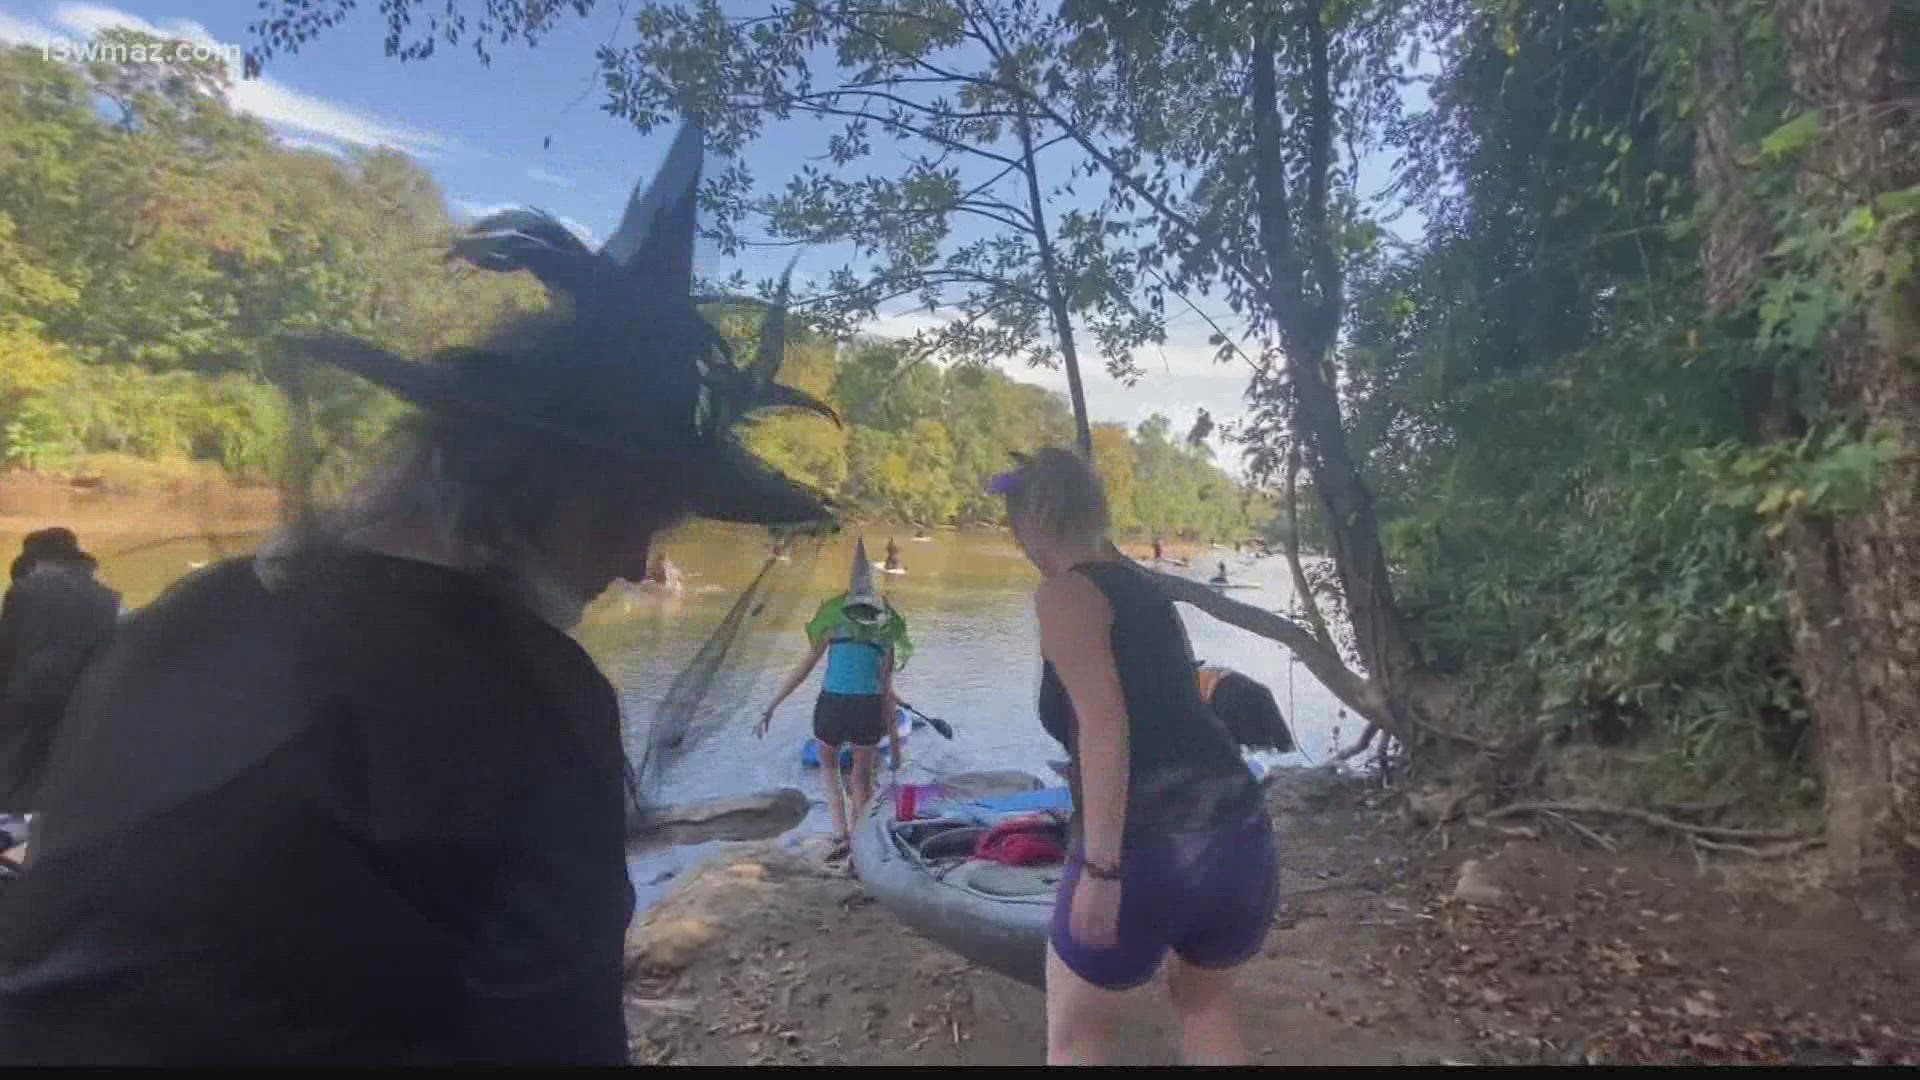 People dressed as witches, warlocks and wizards floated down the the Ocmulgee River Sunday afternoon.